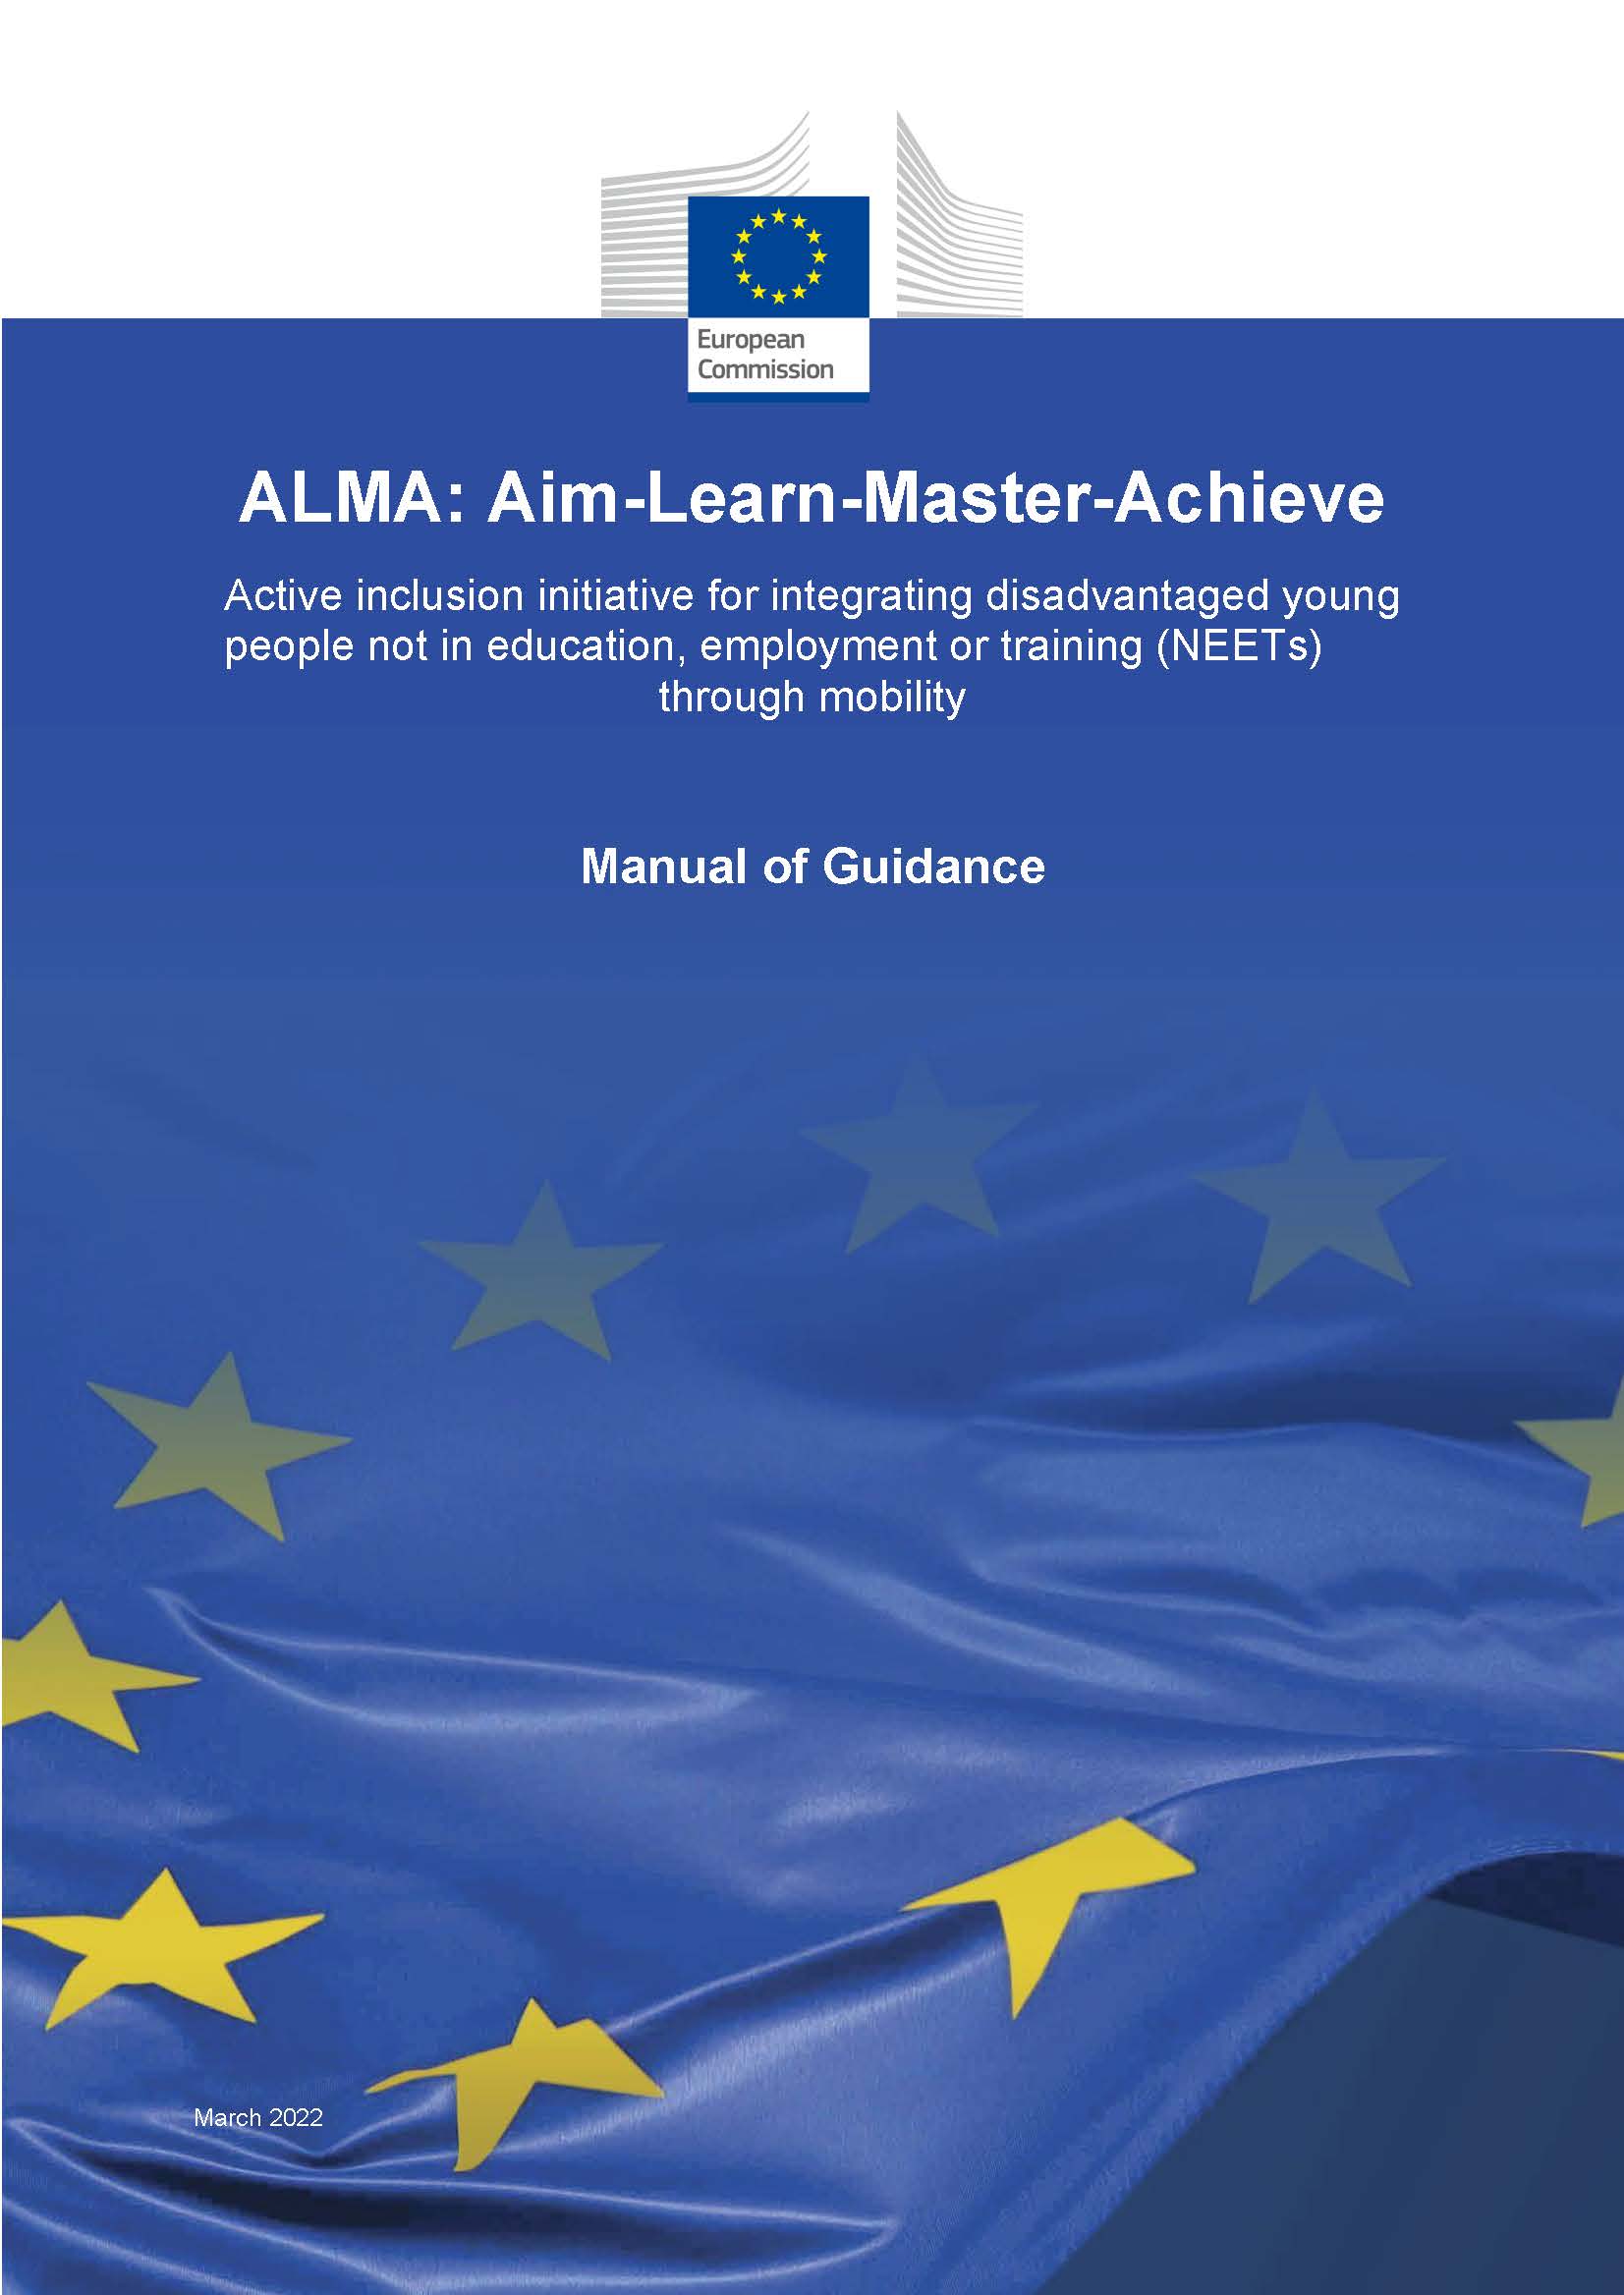 ALMA: Aim-Learn-Master-Achieve
- Active inclusion initiative for integrating disadvantaged young people not in education, employment or training (NEETs) through mobility: Manual of Guidance